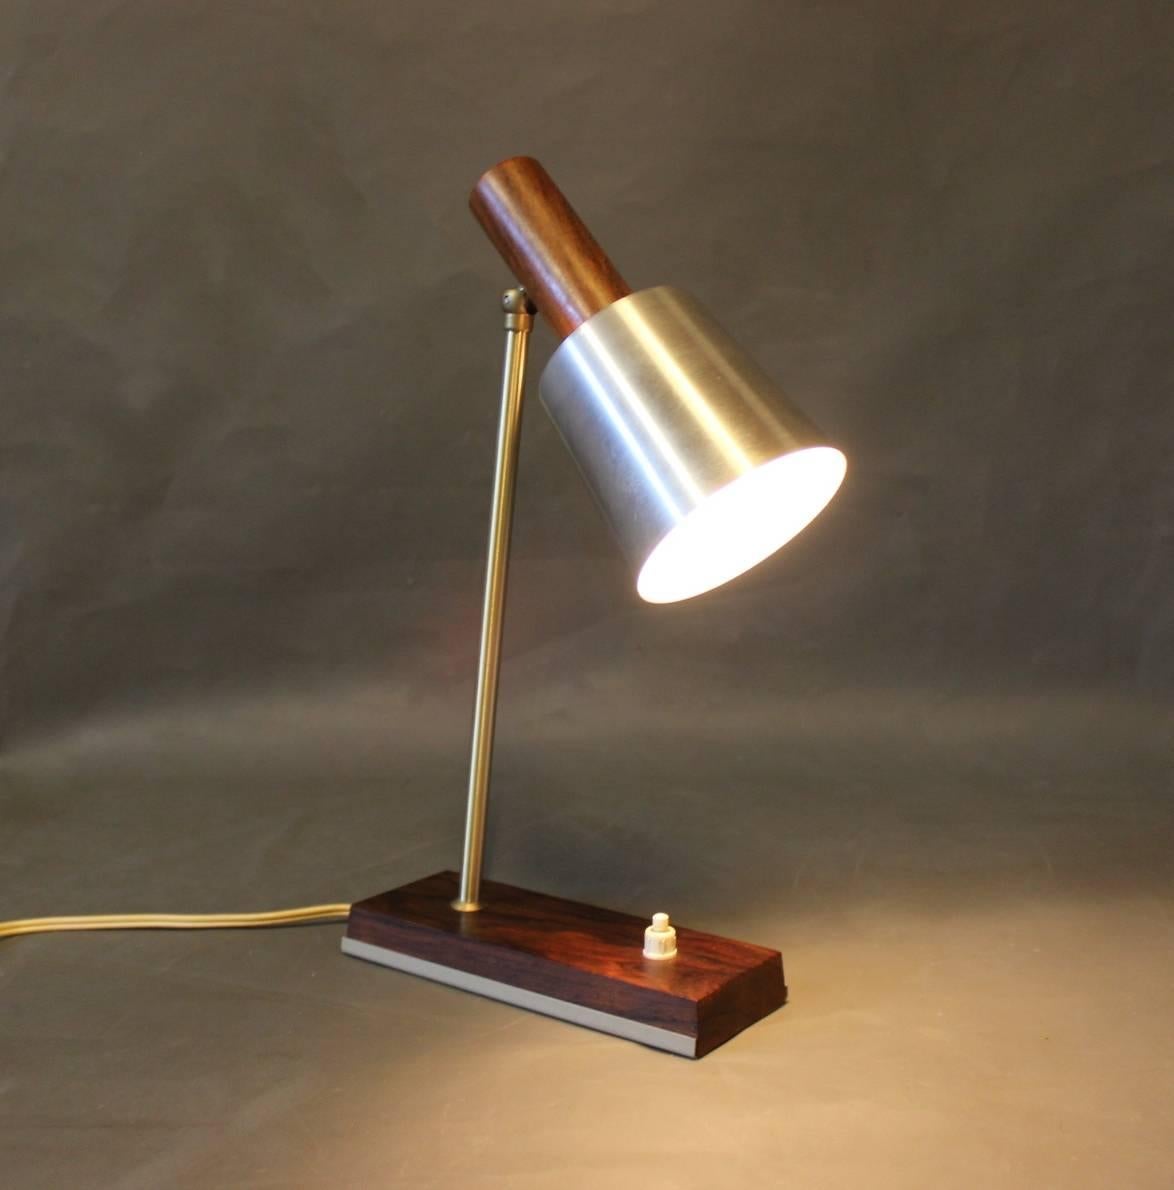 Small table lamp with shade of steel and frame of teak. The lamp is of Danish design from the 1960s.